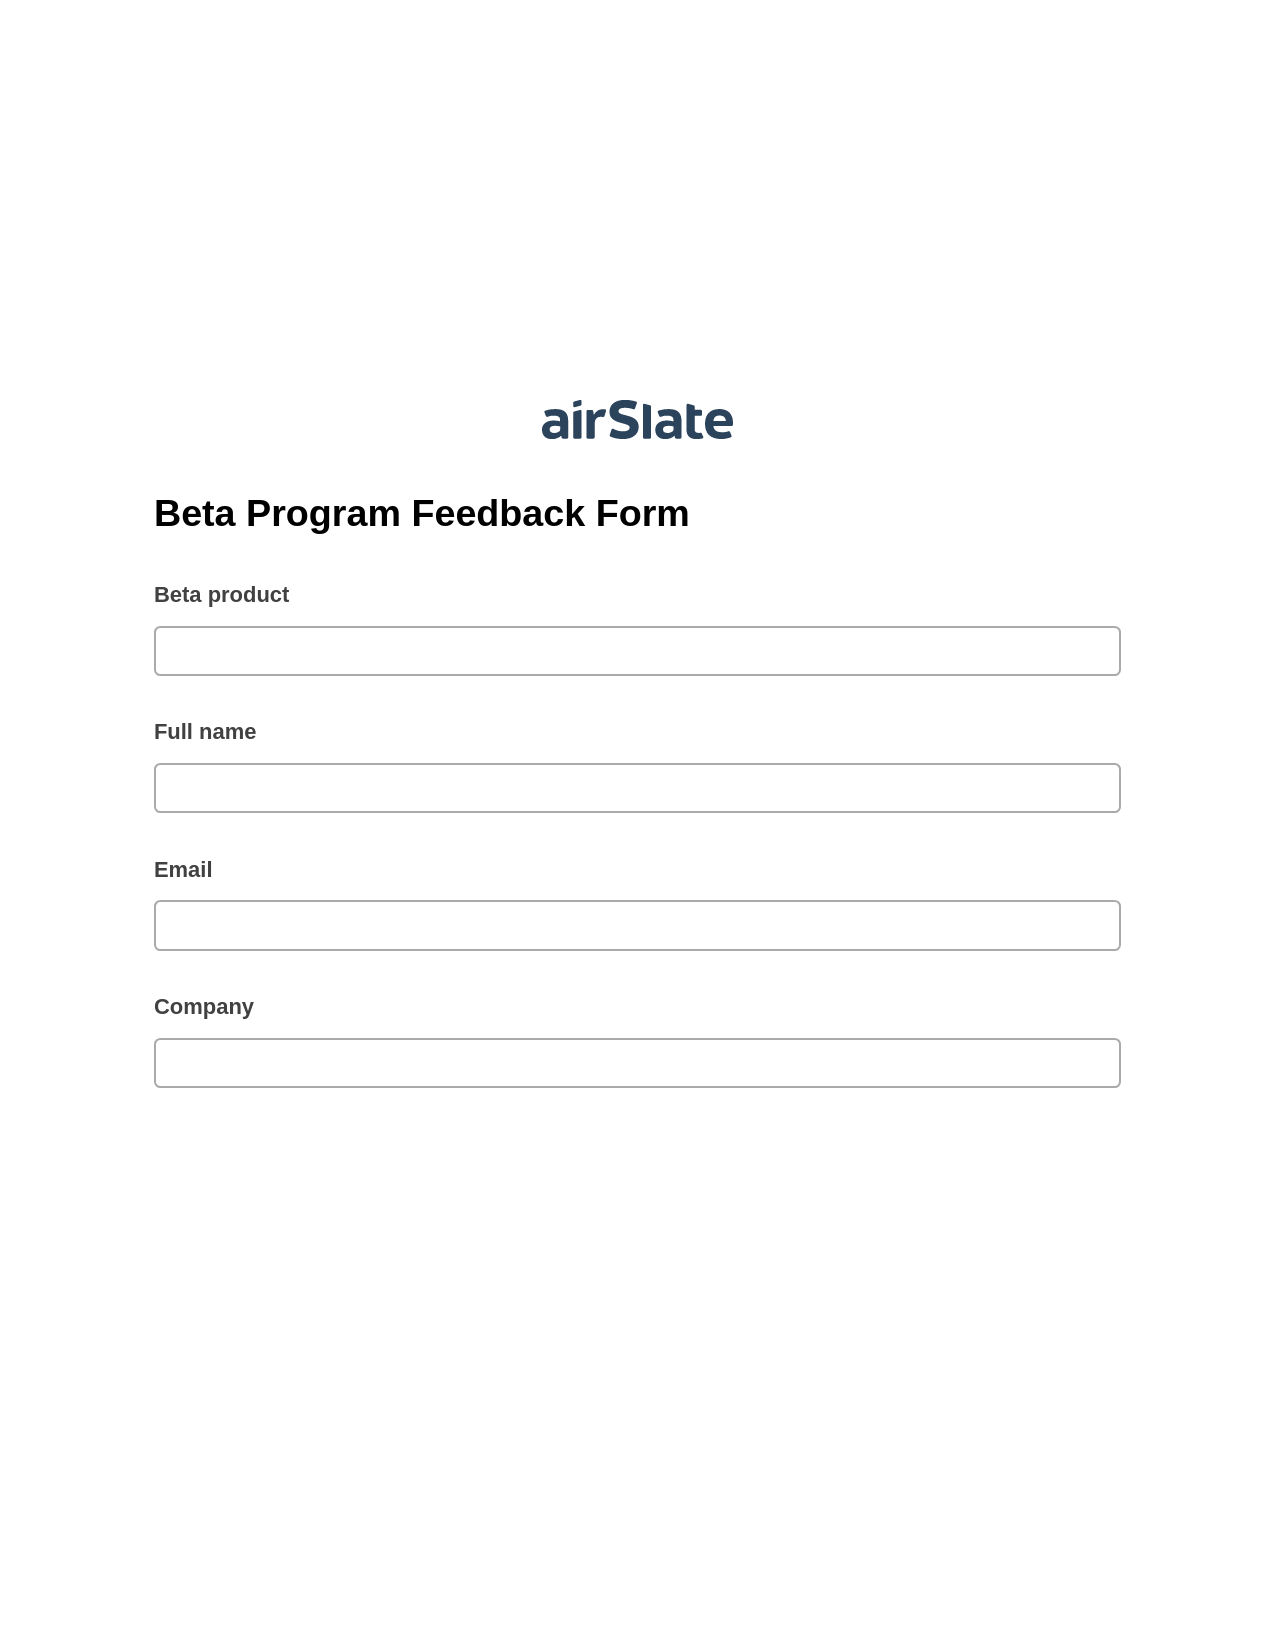 Multirole Beta Program Feedback Form Pre-fill from Salesforce Record Bot, Send Mailchimp Campaign Bot, Export to Excel 365 Bot